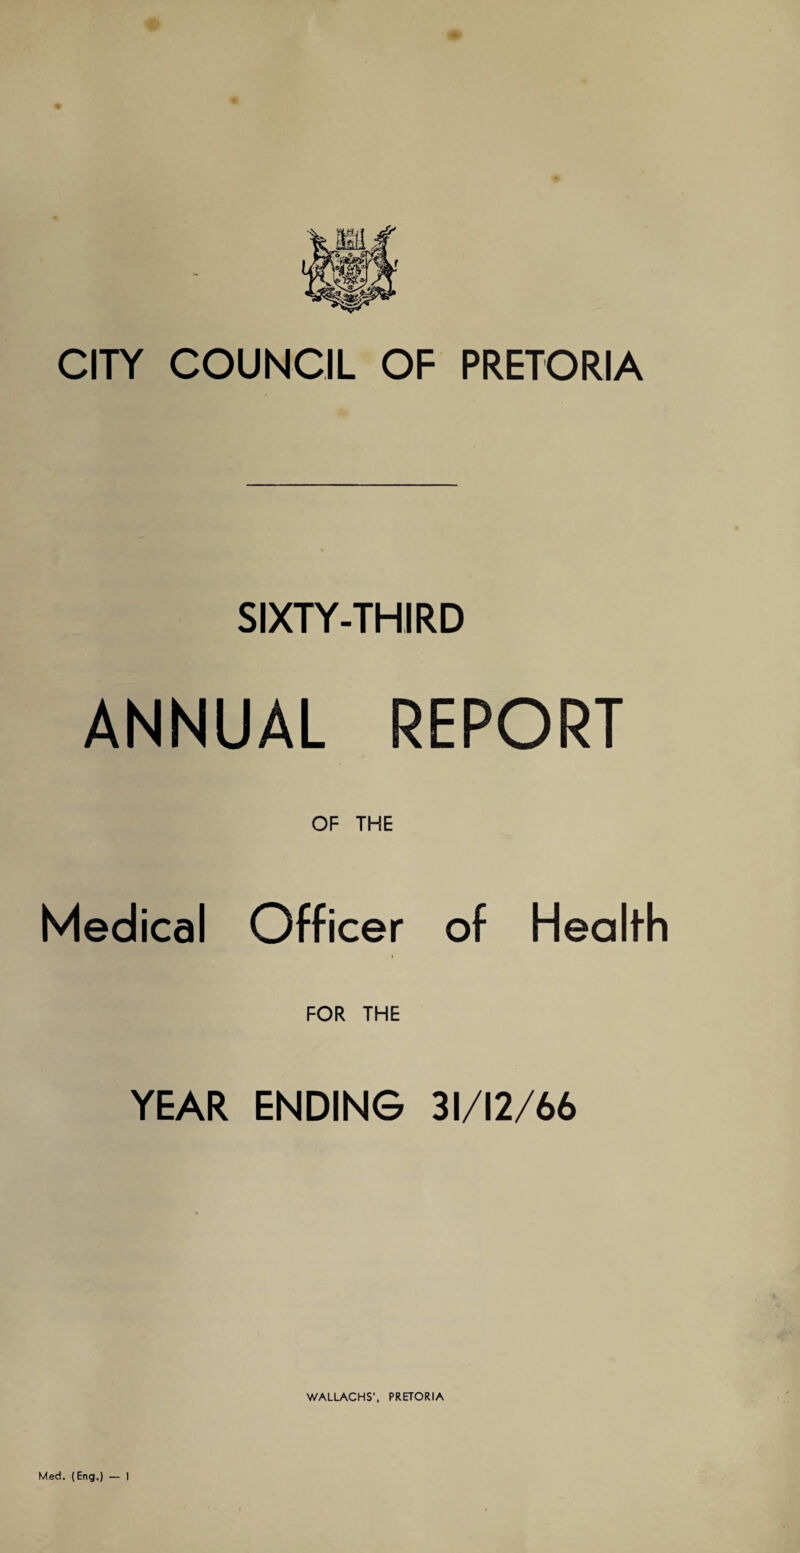 CITY COUNCIL OF PRETORIA SIXTY-THIRD ANNUAL REPORT OF THE Medical Officer of Health FOR THE YEAR ENDING 31/12/66 WALLACHS', PRETORIA